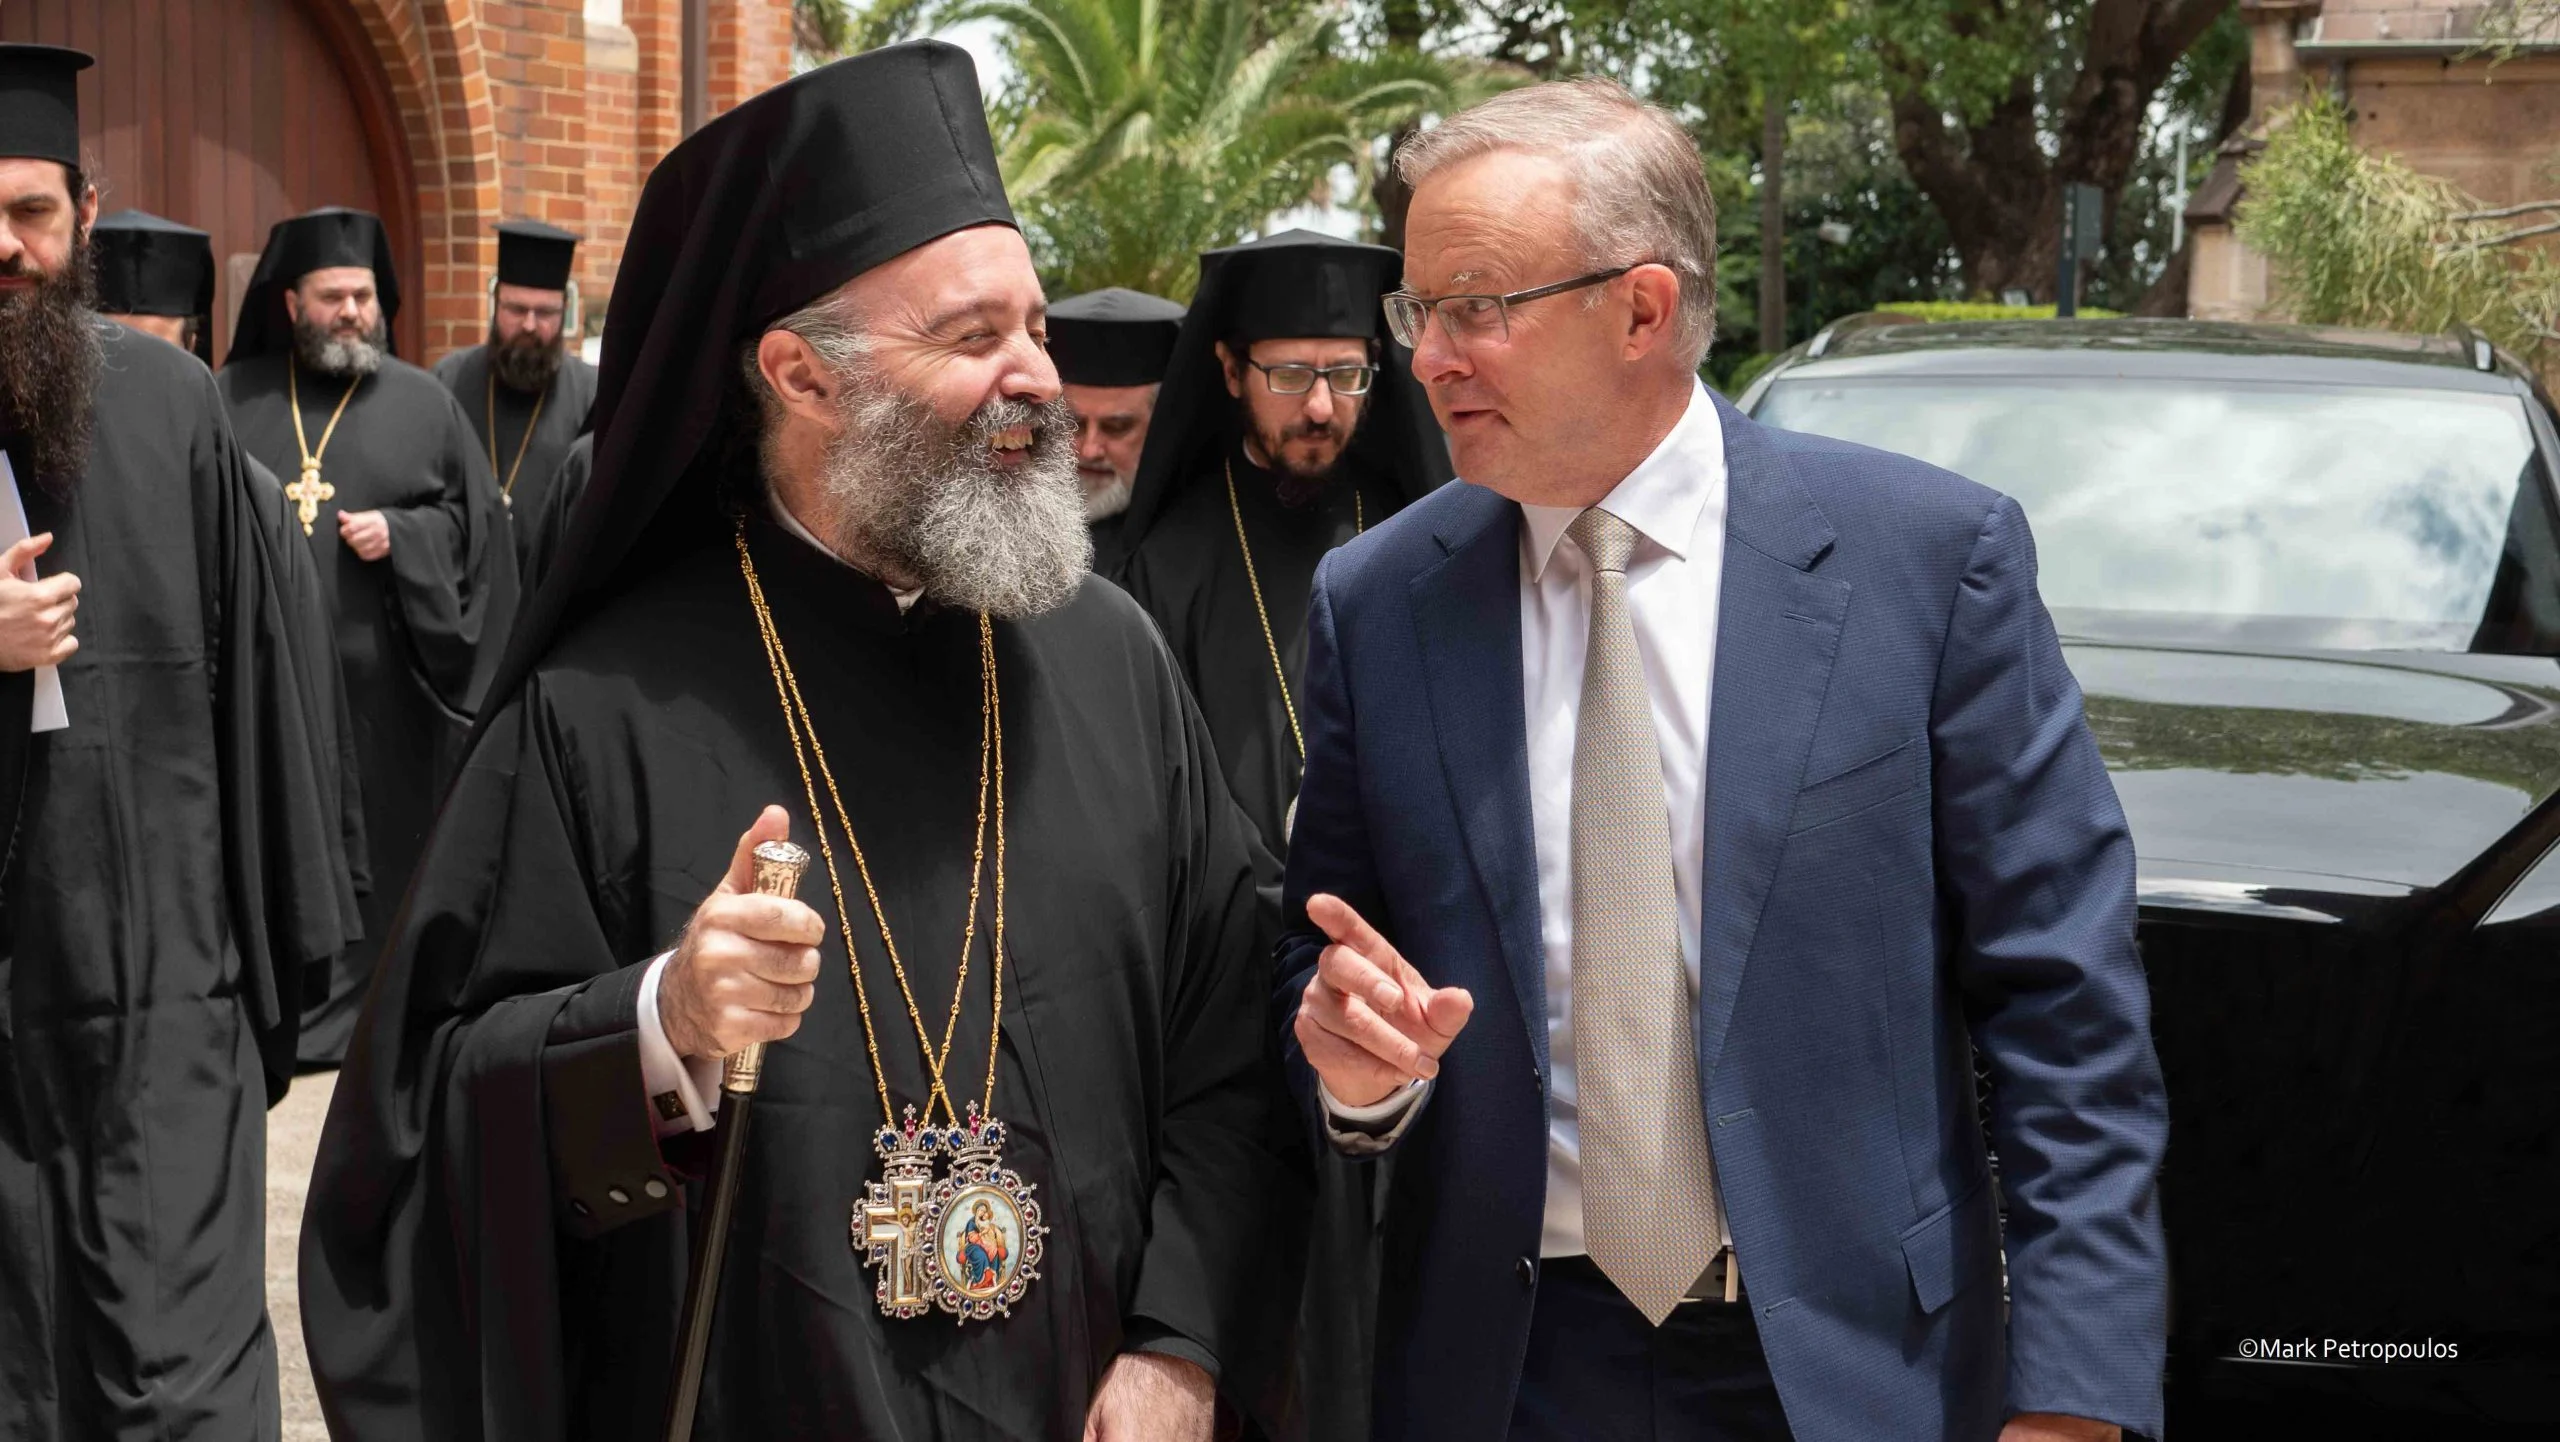 Opposition Leader Anthony Albanese visits the Holy Archdiocese of Australia